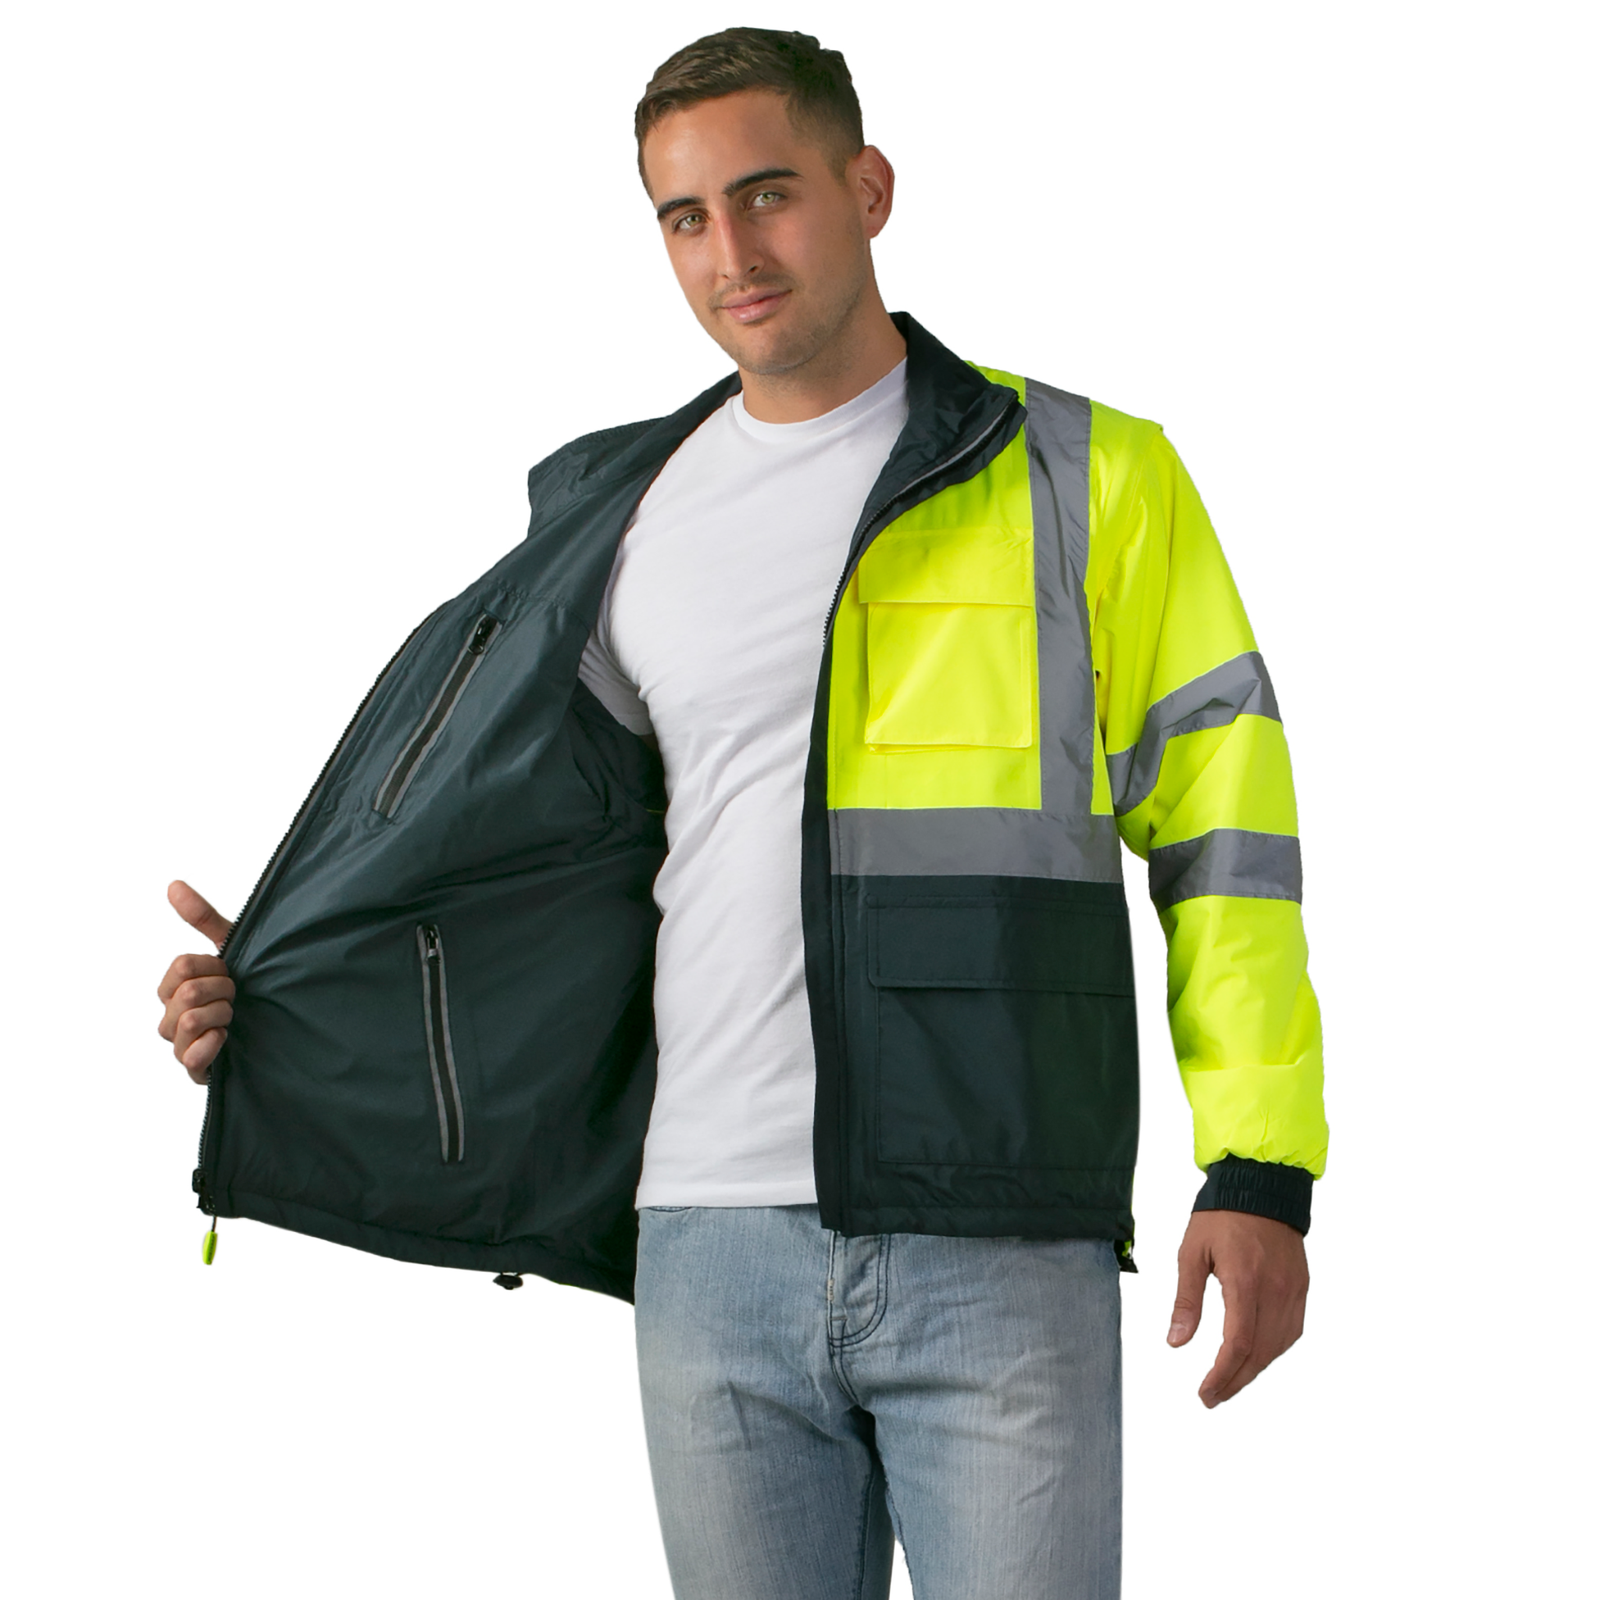 Man wearing the reflective side of the ANSI safety jacket